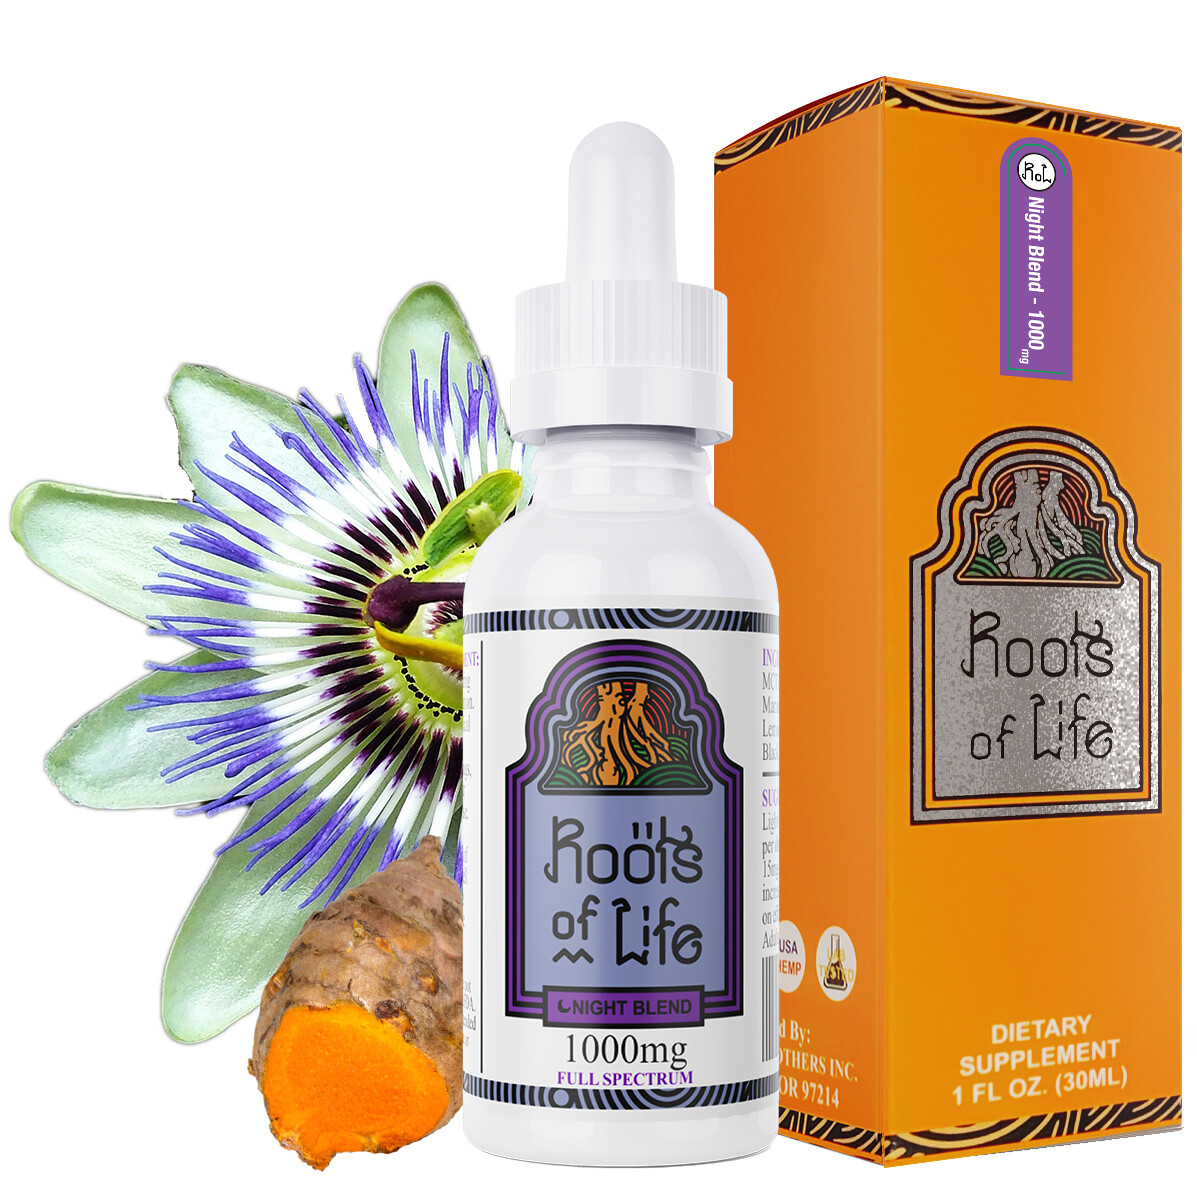 Roots of Life - Full Spectrum Nighttime with Turmeric (1000mg)